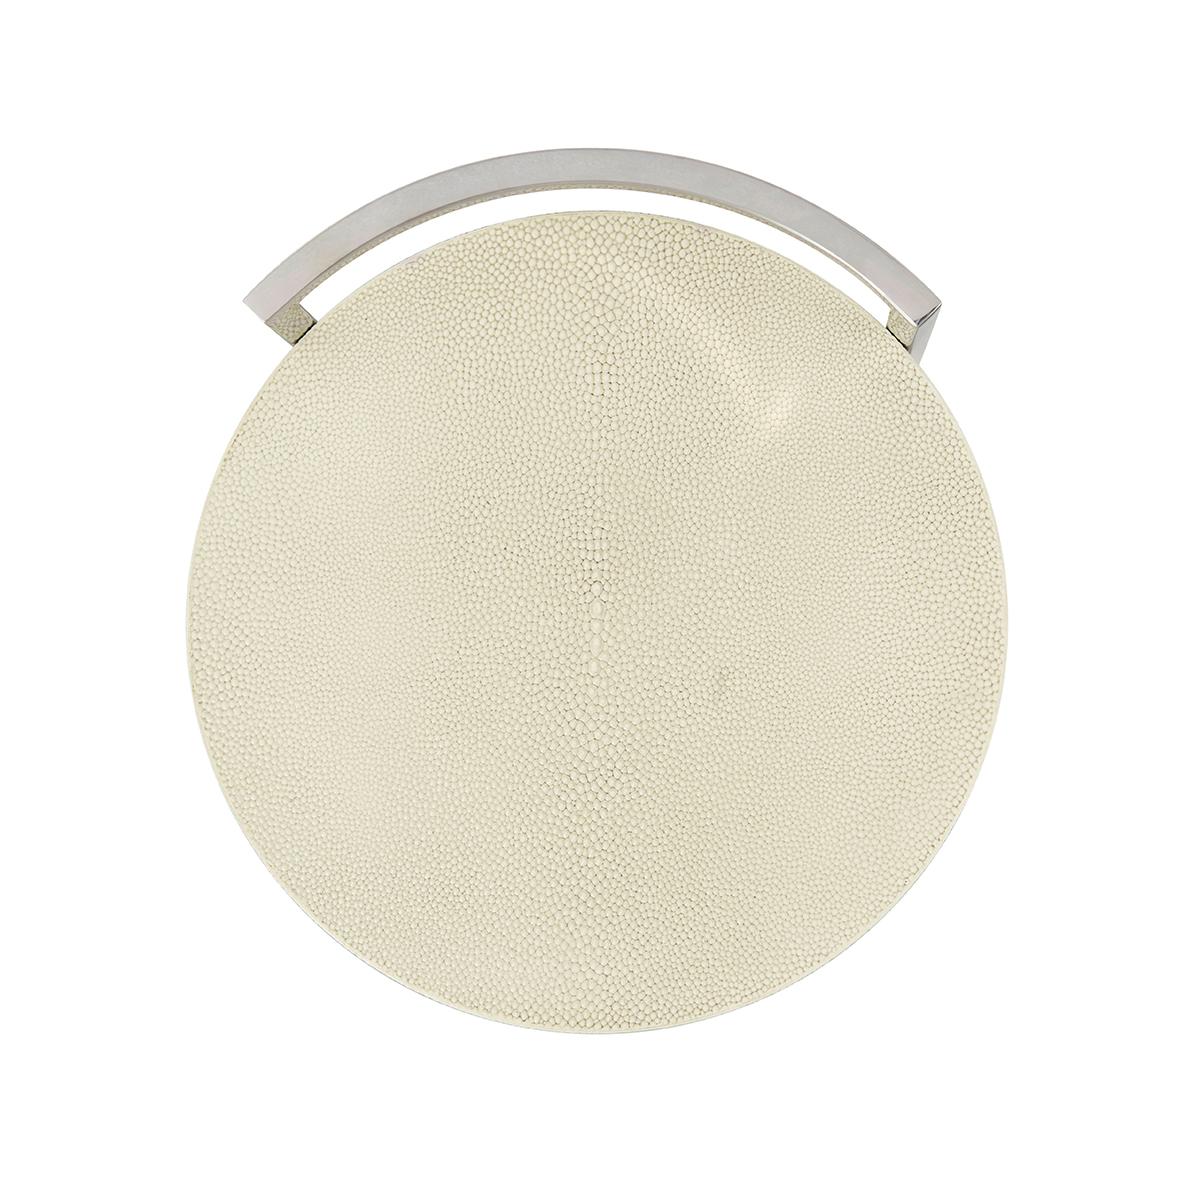 With a circular suspended faux shagreen wrapped top in a light cream overcast finish supported by a slender nickel finish base.

Dimensions: 12